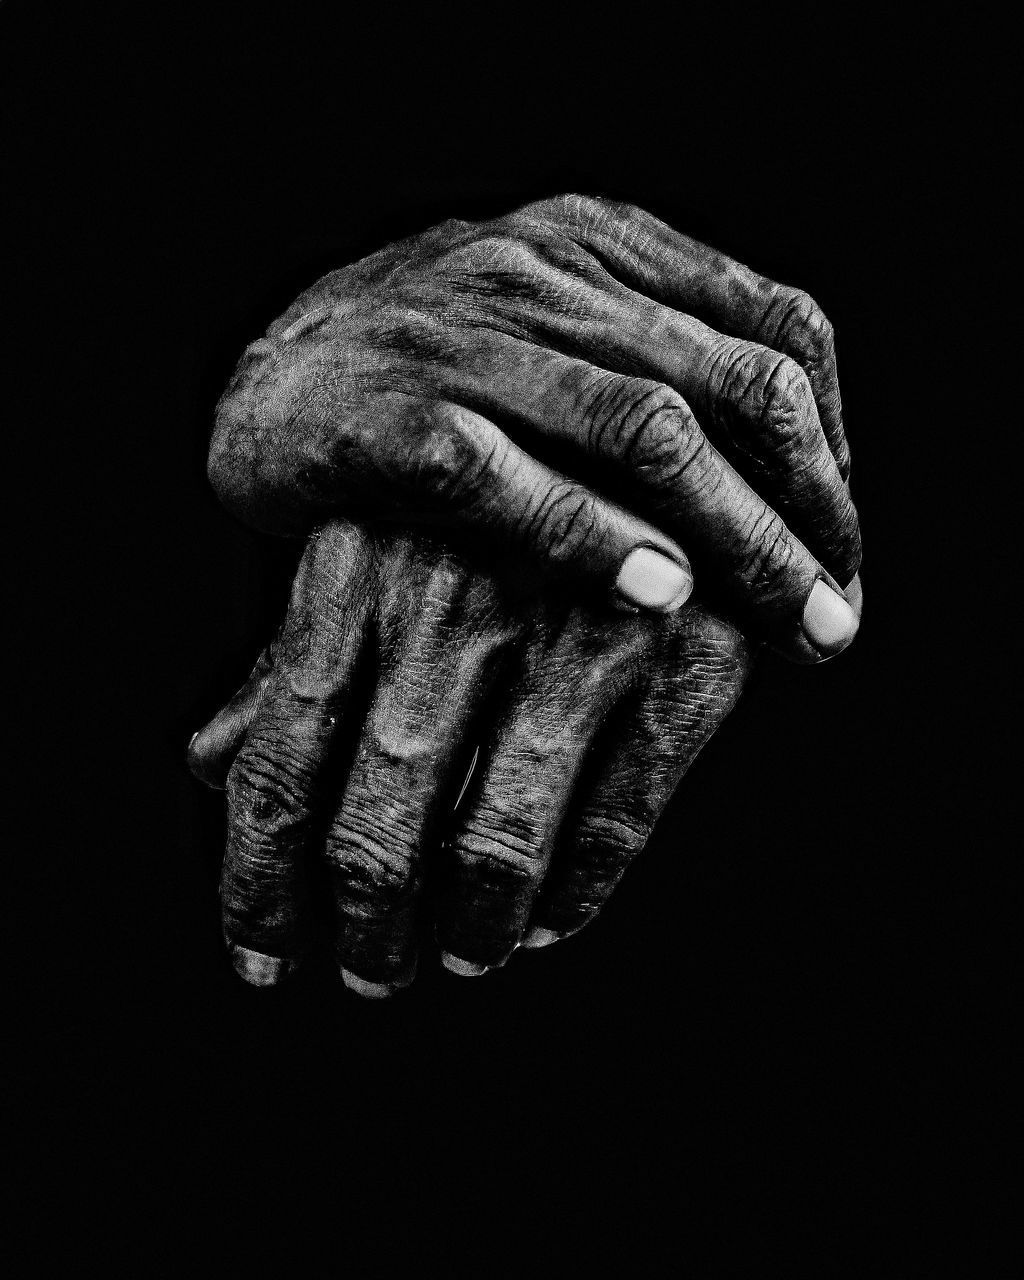 CLOSE-UP OF HUMAN HANDS AGAINST BLACK BACKGROUND